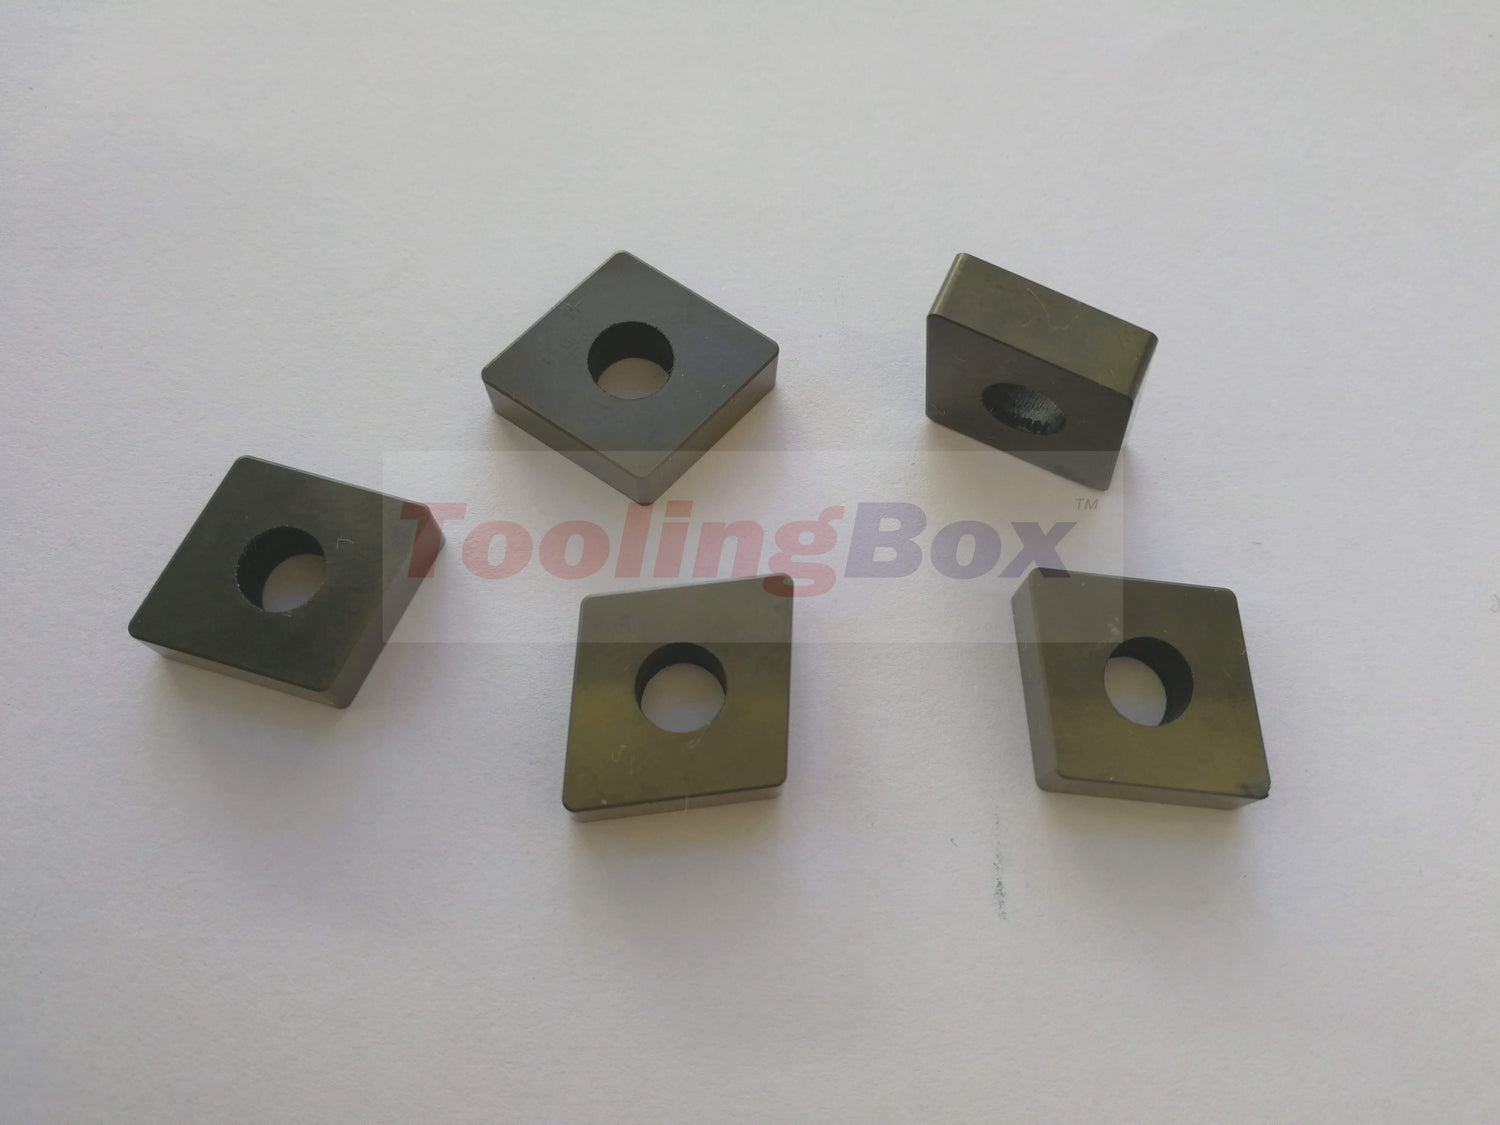 full CBN inserts CNMG 1204 TB100 with straight hole for brake disc turning